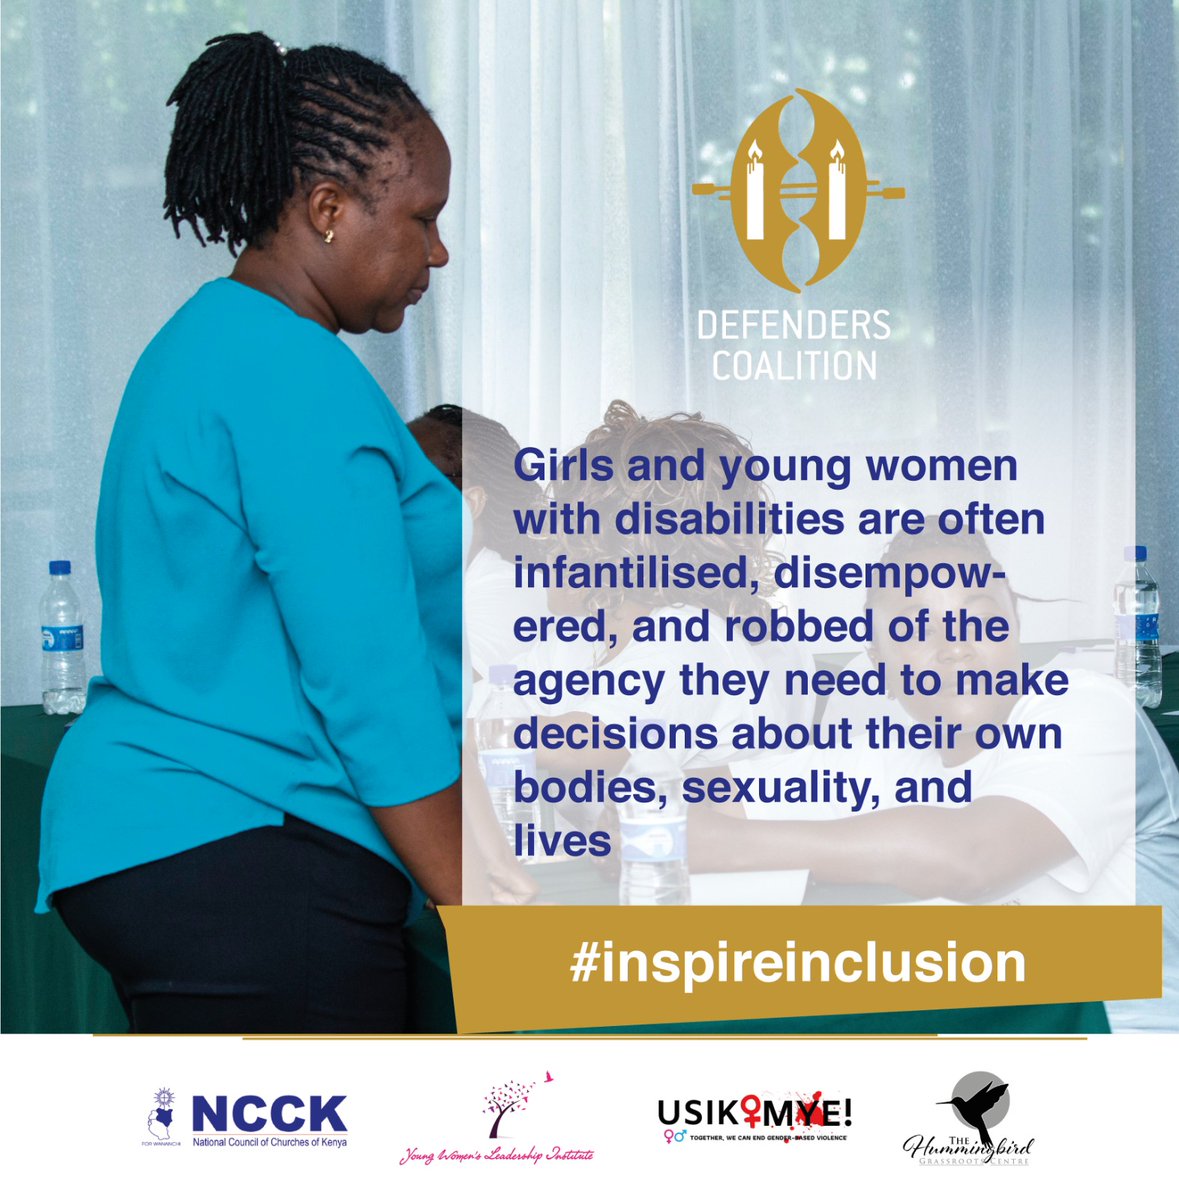 By amplifying the voices of girls and young women with disabilities, we can foster a more inclusive and equitable society for all.
#inspireinclusion